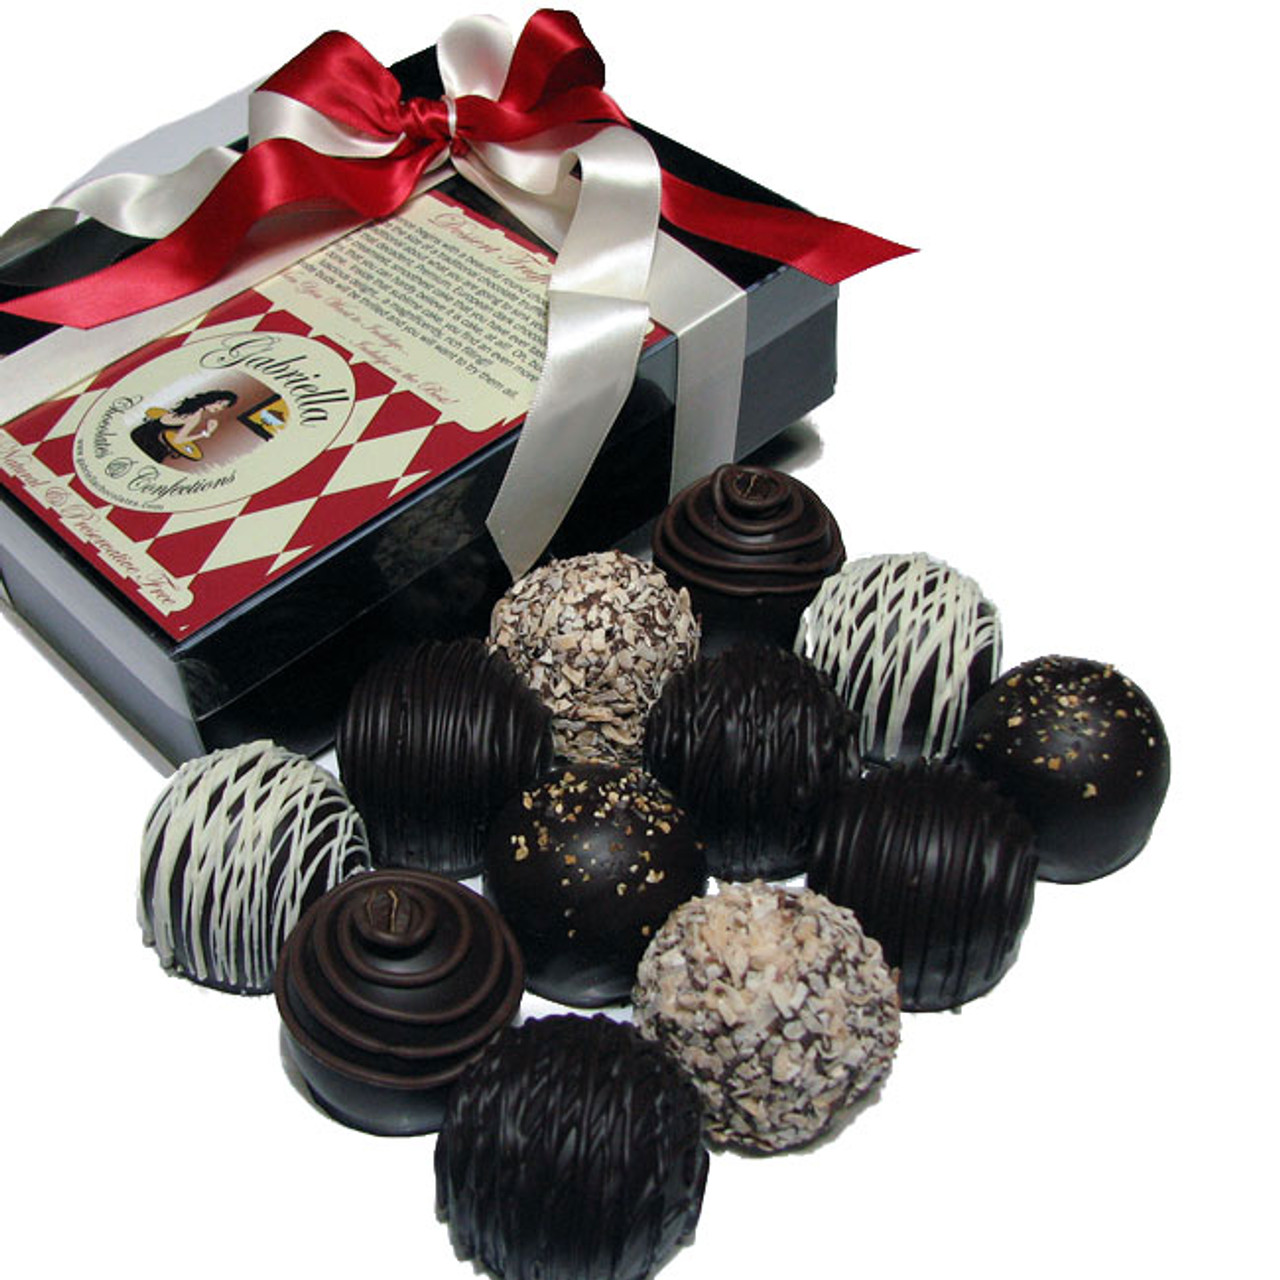 What is the best way to store chocolate truffles?